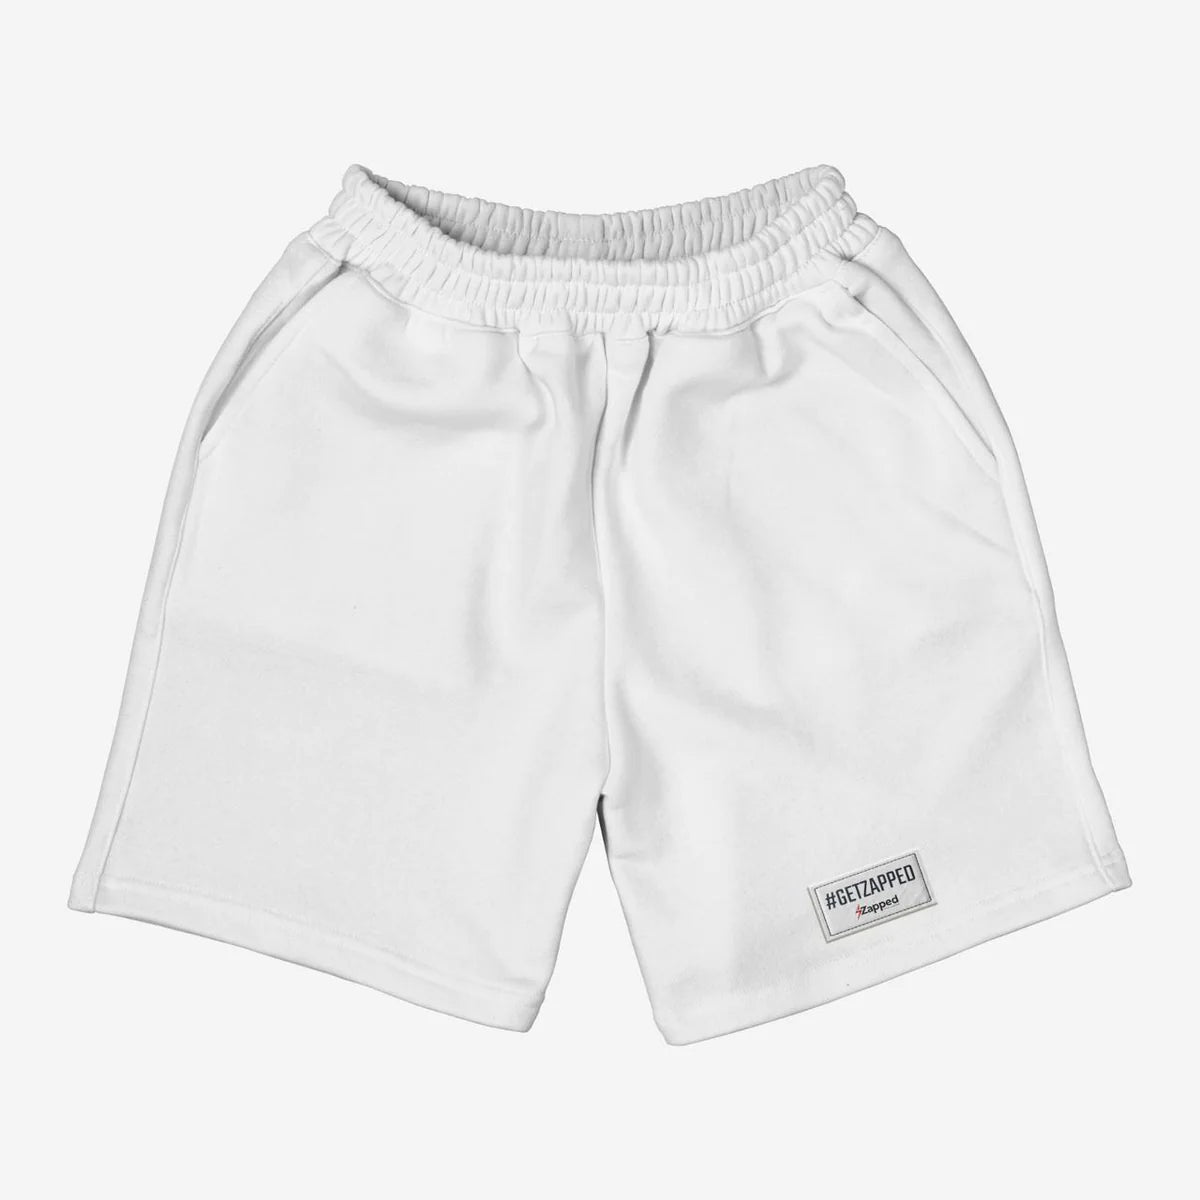 How Do Terry Cotton Shorts Differ from Other Materials in Comfort and Style?